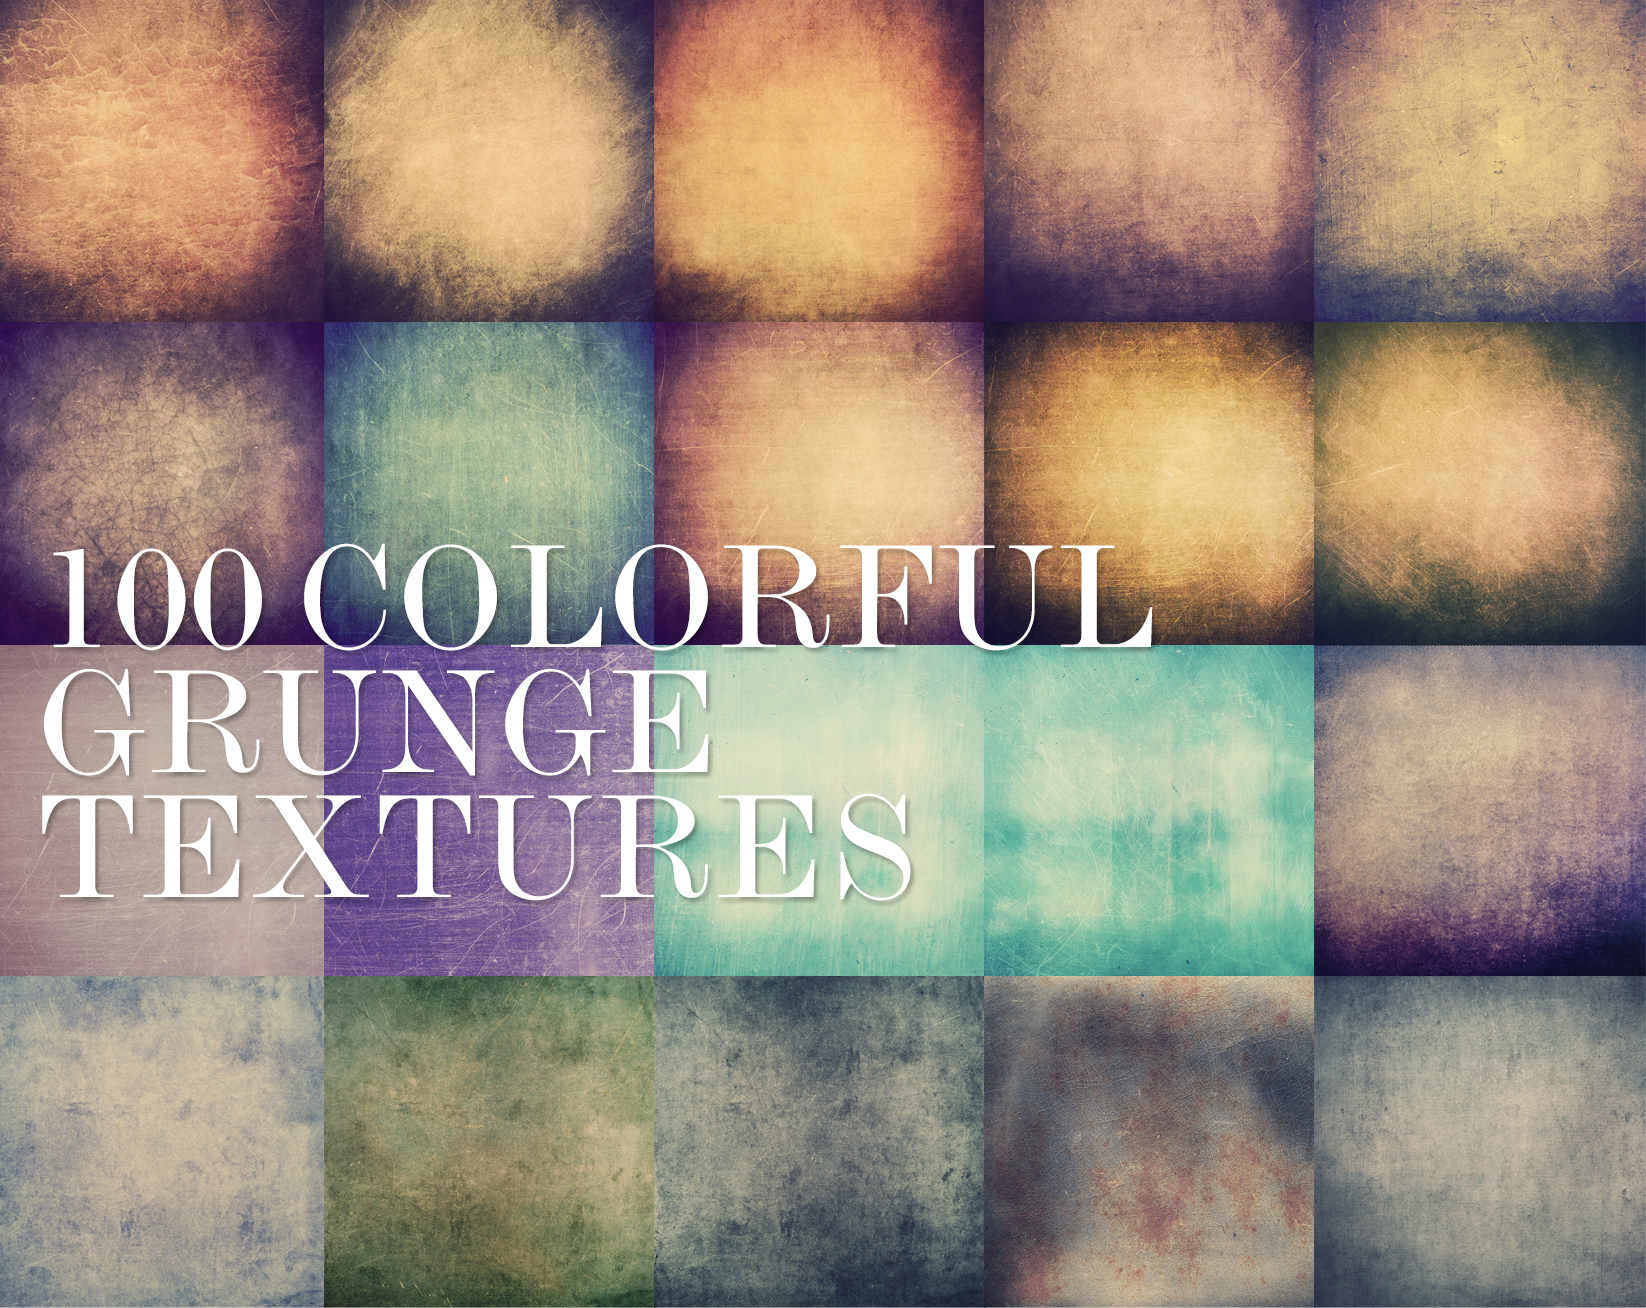 75off 100 Colorful Grunge Textures ~ Textures On Creative Market 